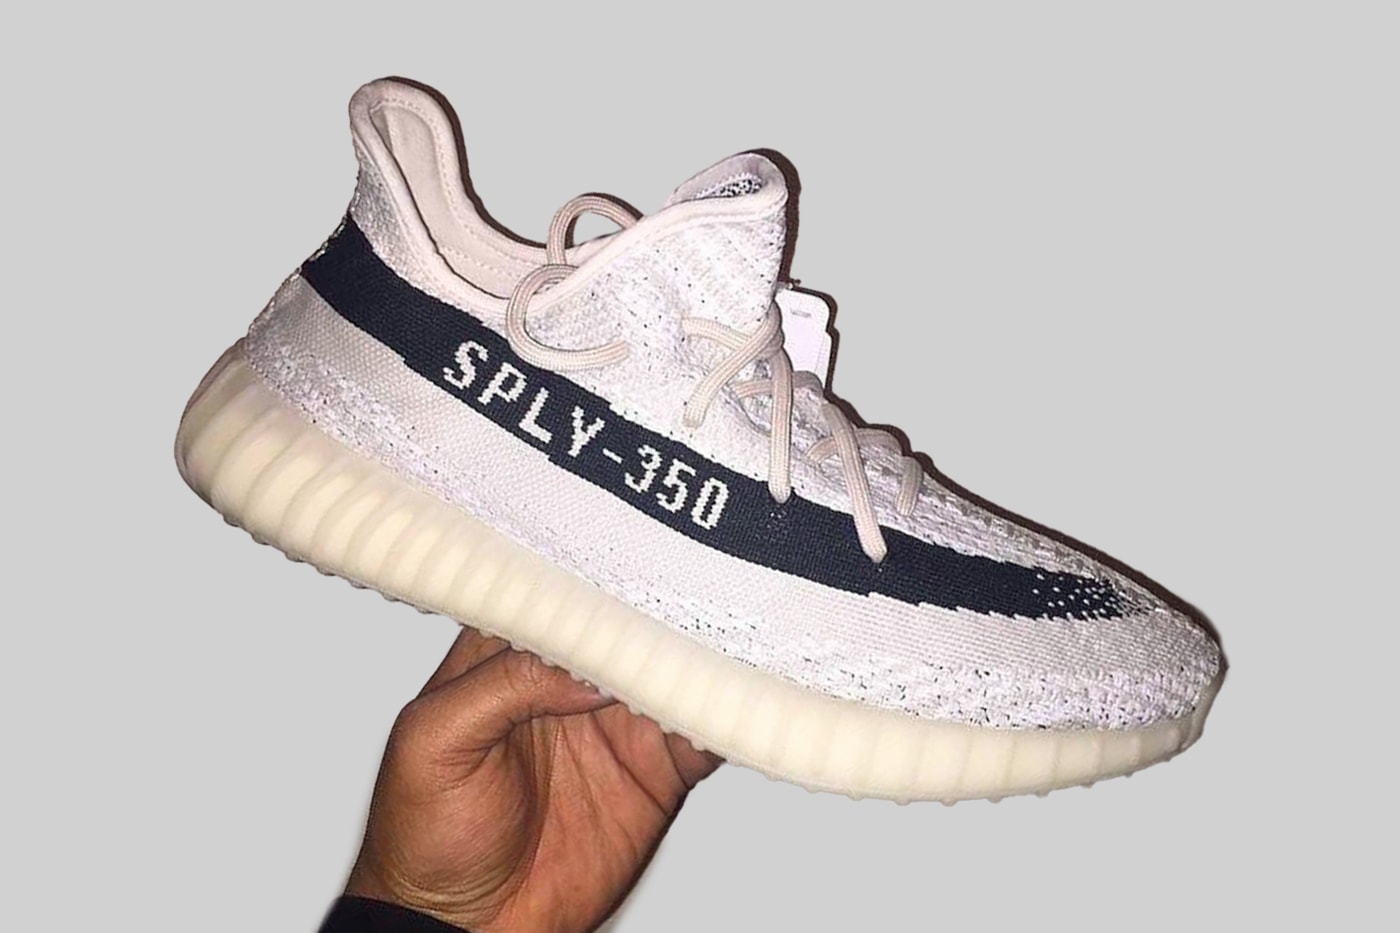 adidas YEEZY BOOST 350 V2 Reverse Oreo First Look Release Info Date Buy Price Kanye West